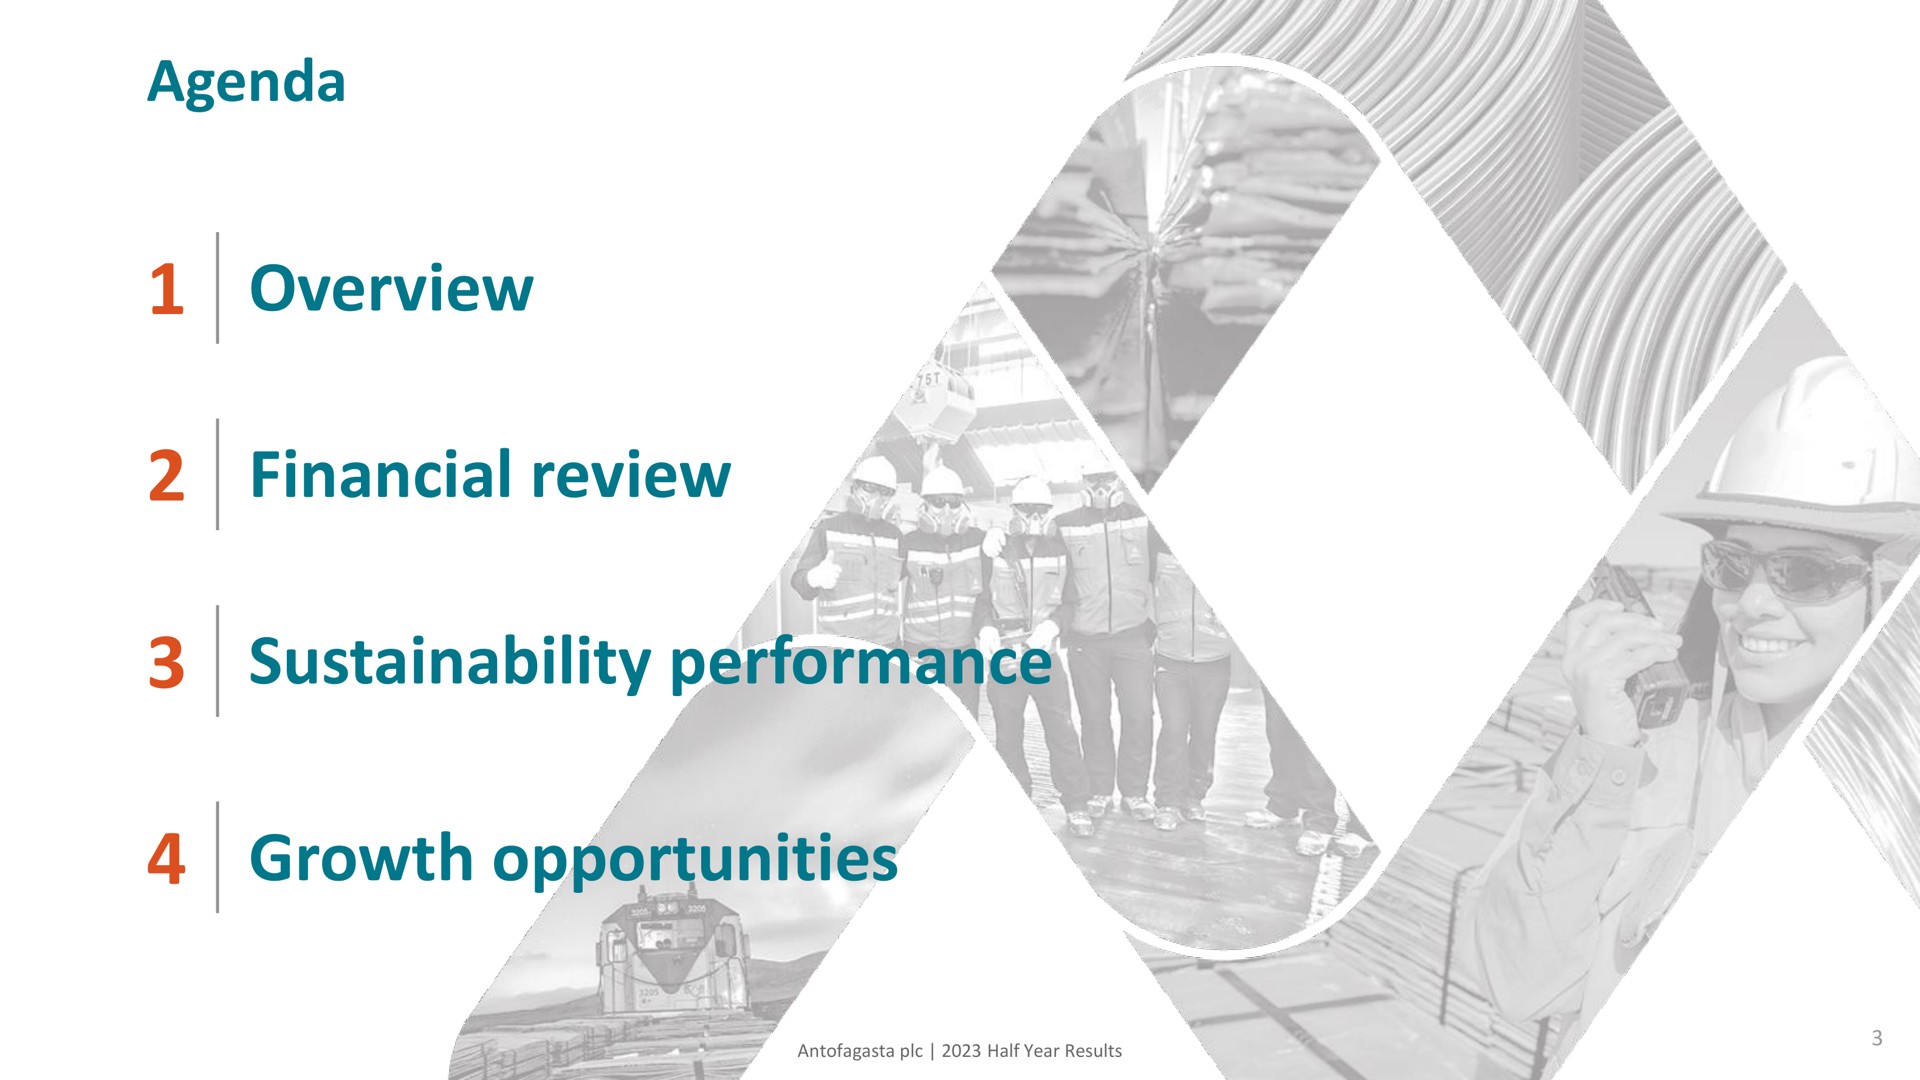 agenda overview financial review performance growth opportunities i i a i a i a i a i i a | Antofagasta